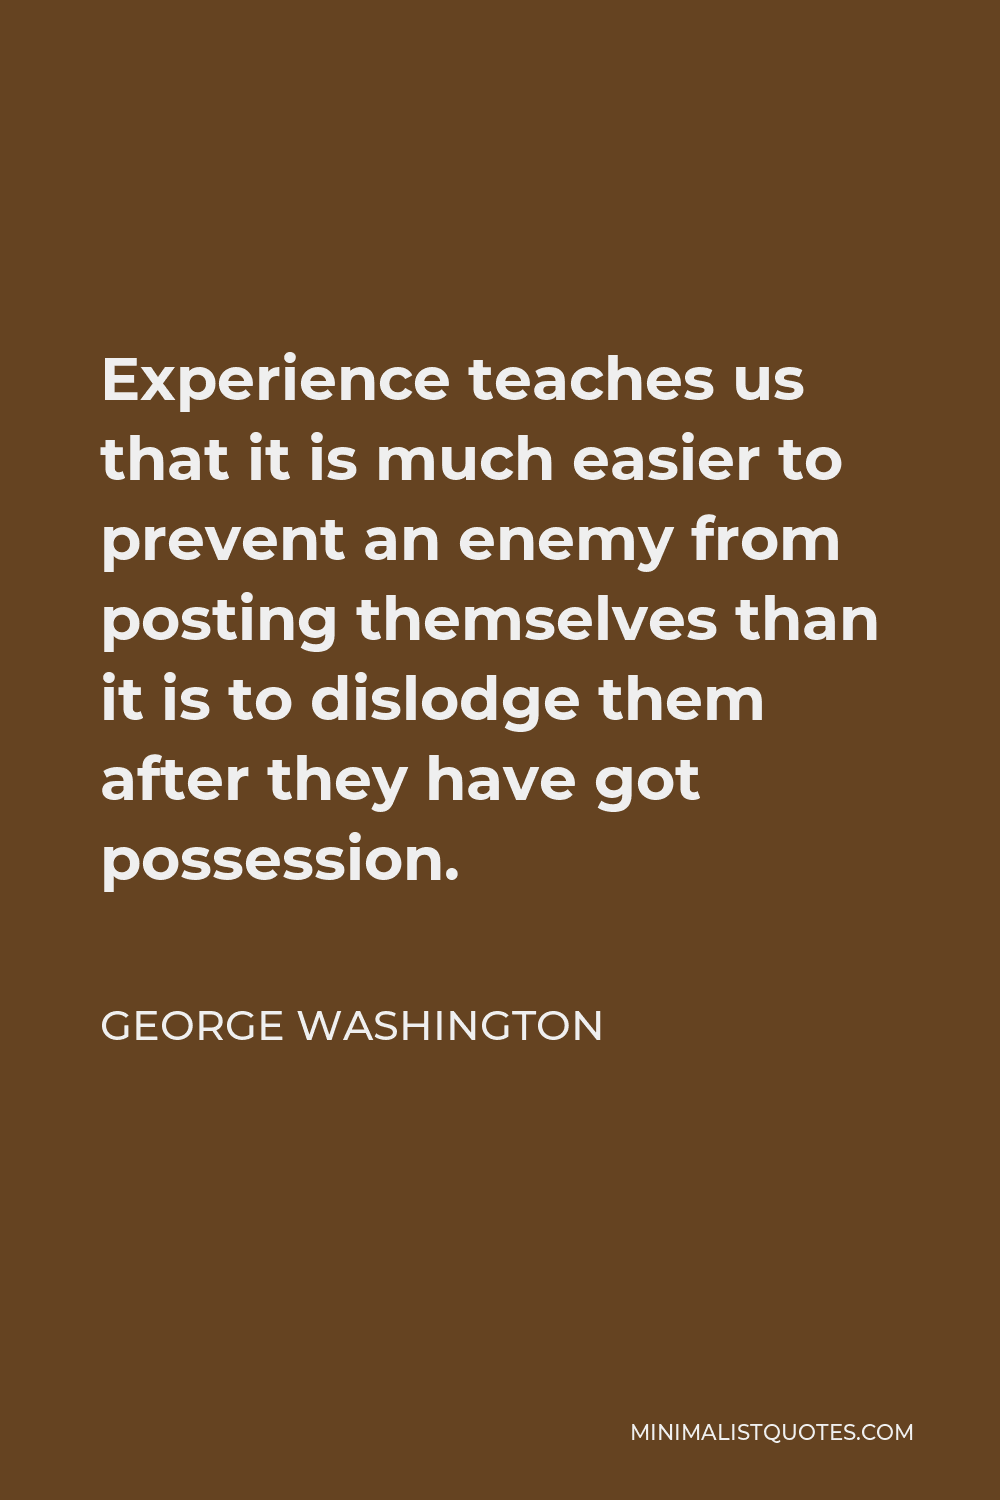 George Washington Quote - Experience teaches us that it is much easier to prevent an enemy from posting themselves than it is to dislodge them after they have got possession.